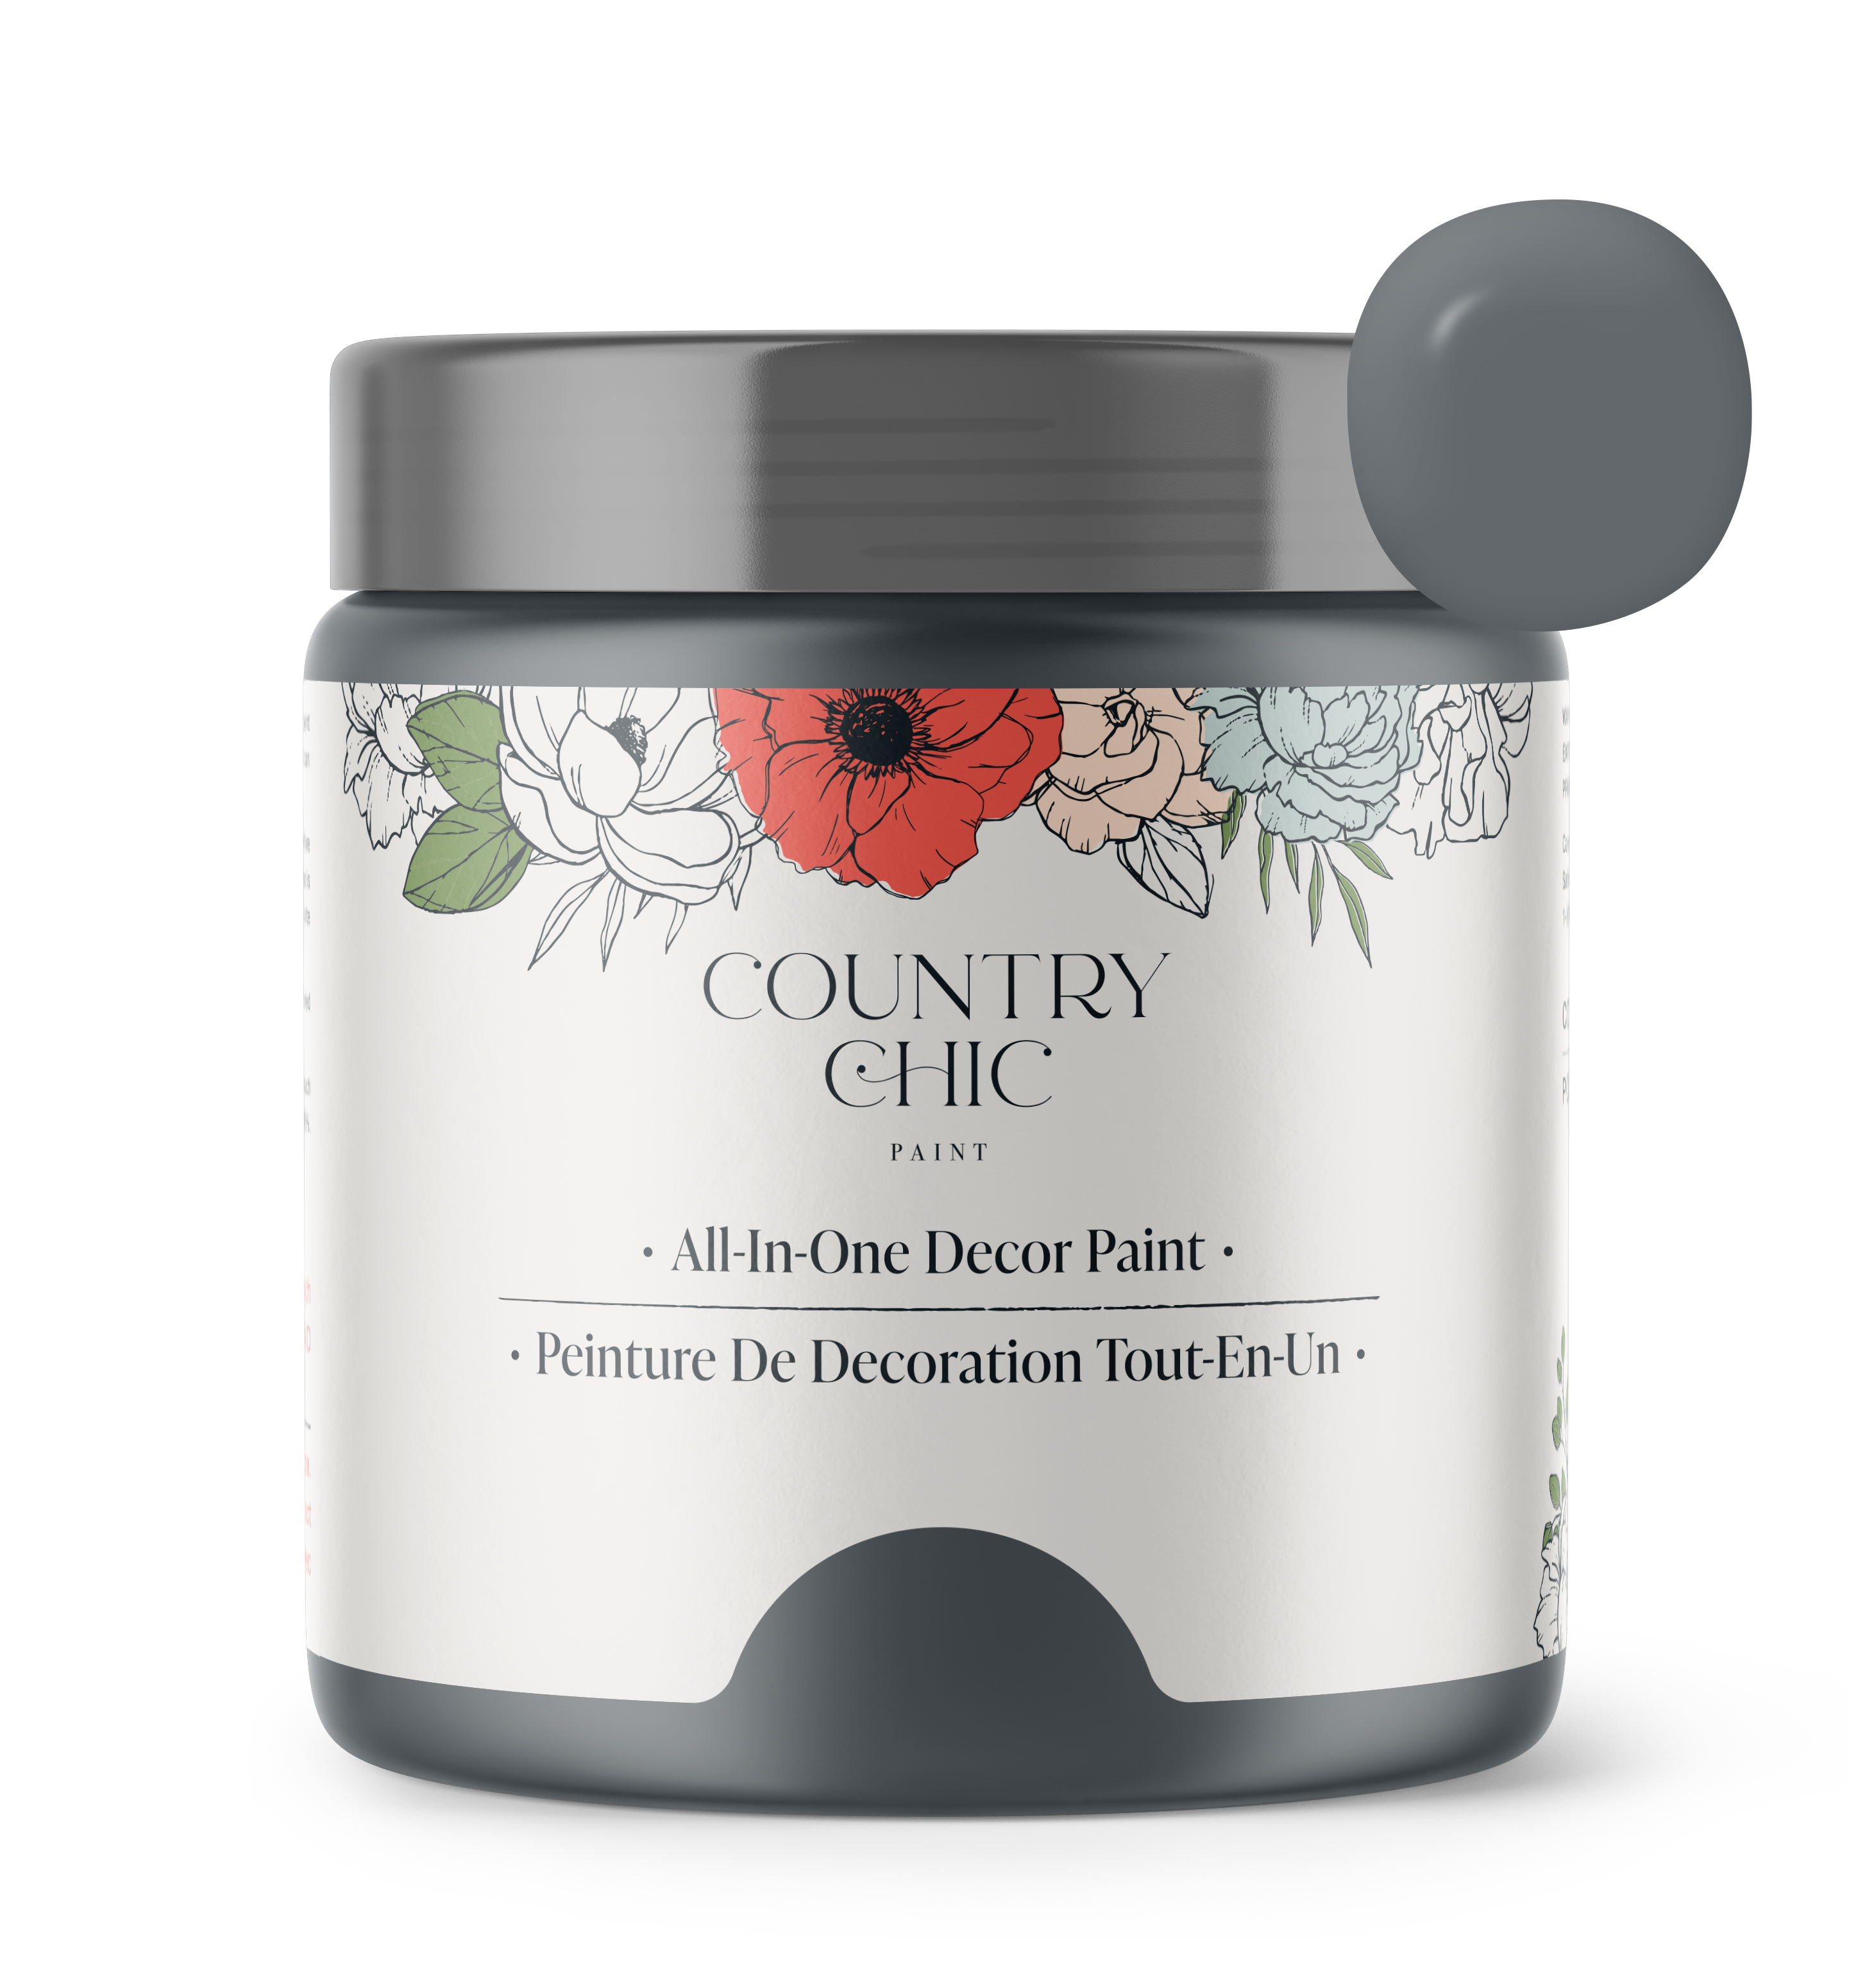 All-in-One Decor Paint - Hurricane